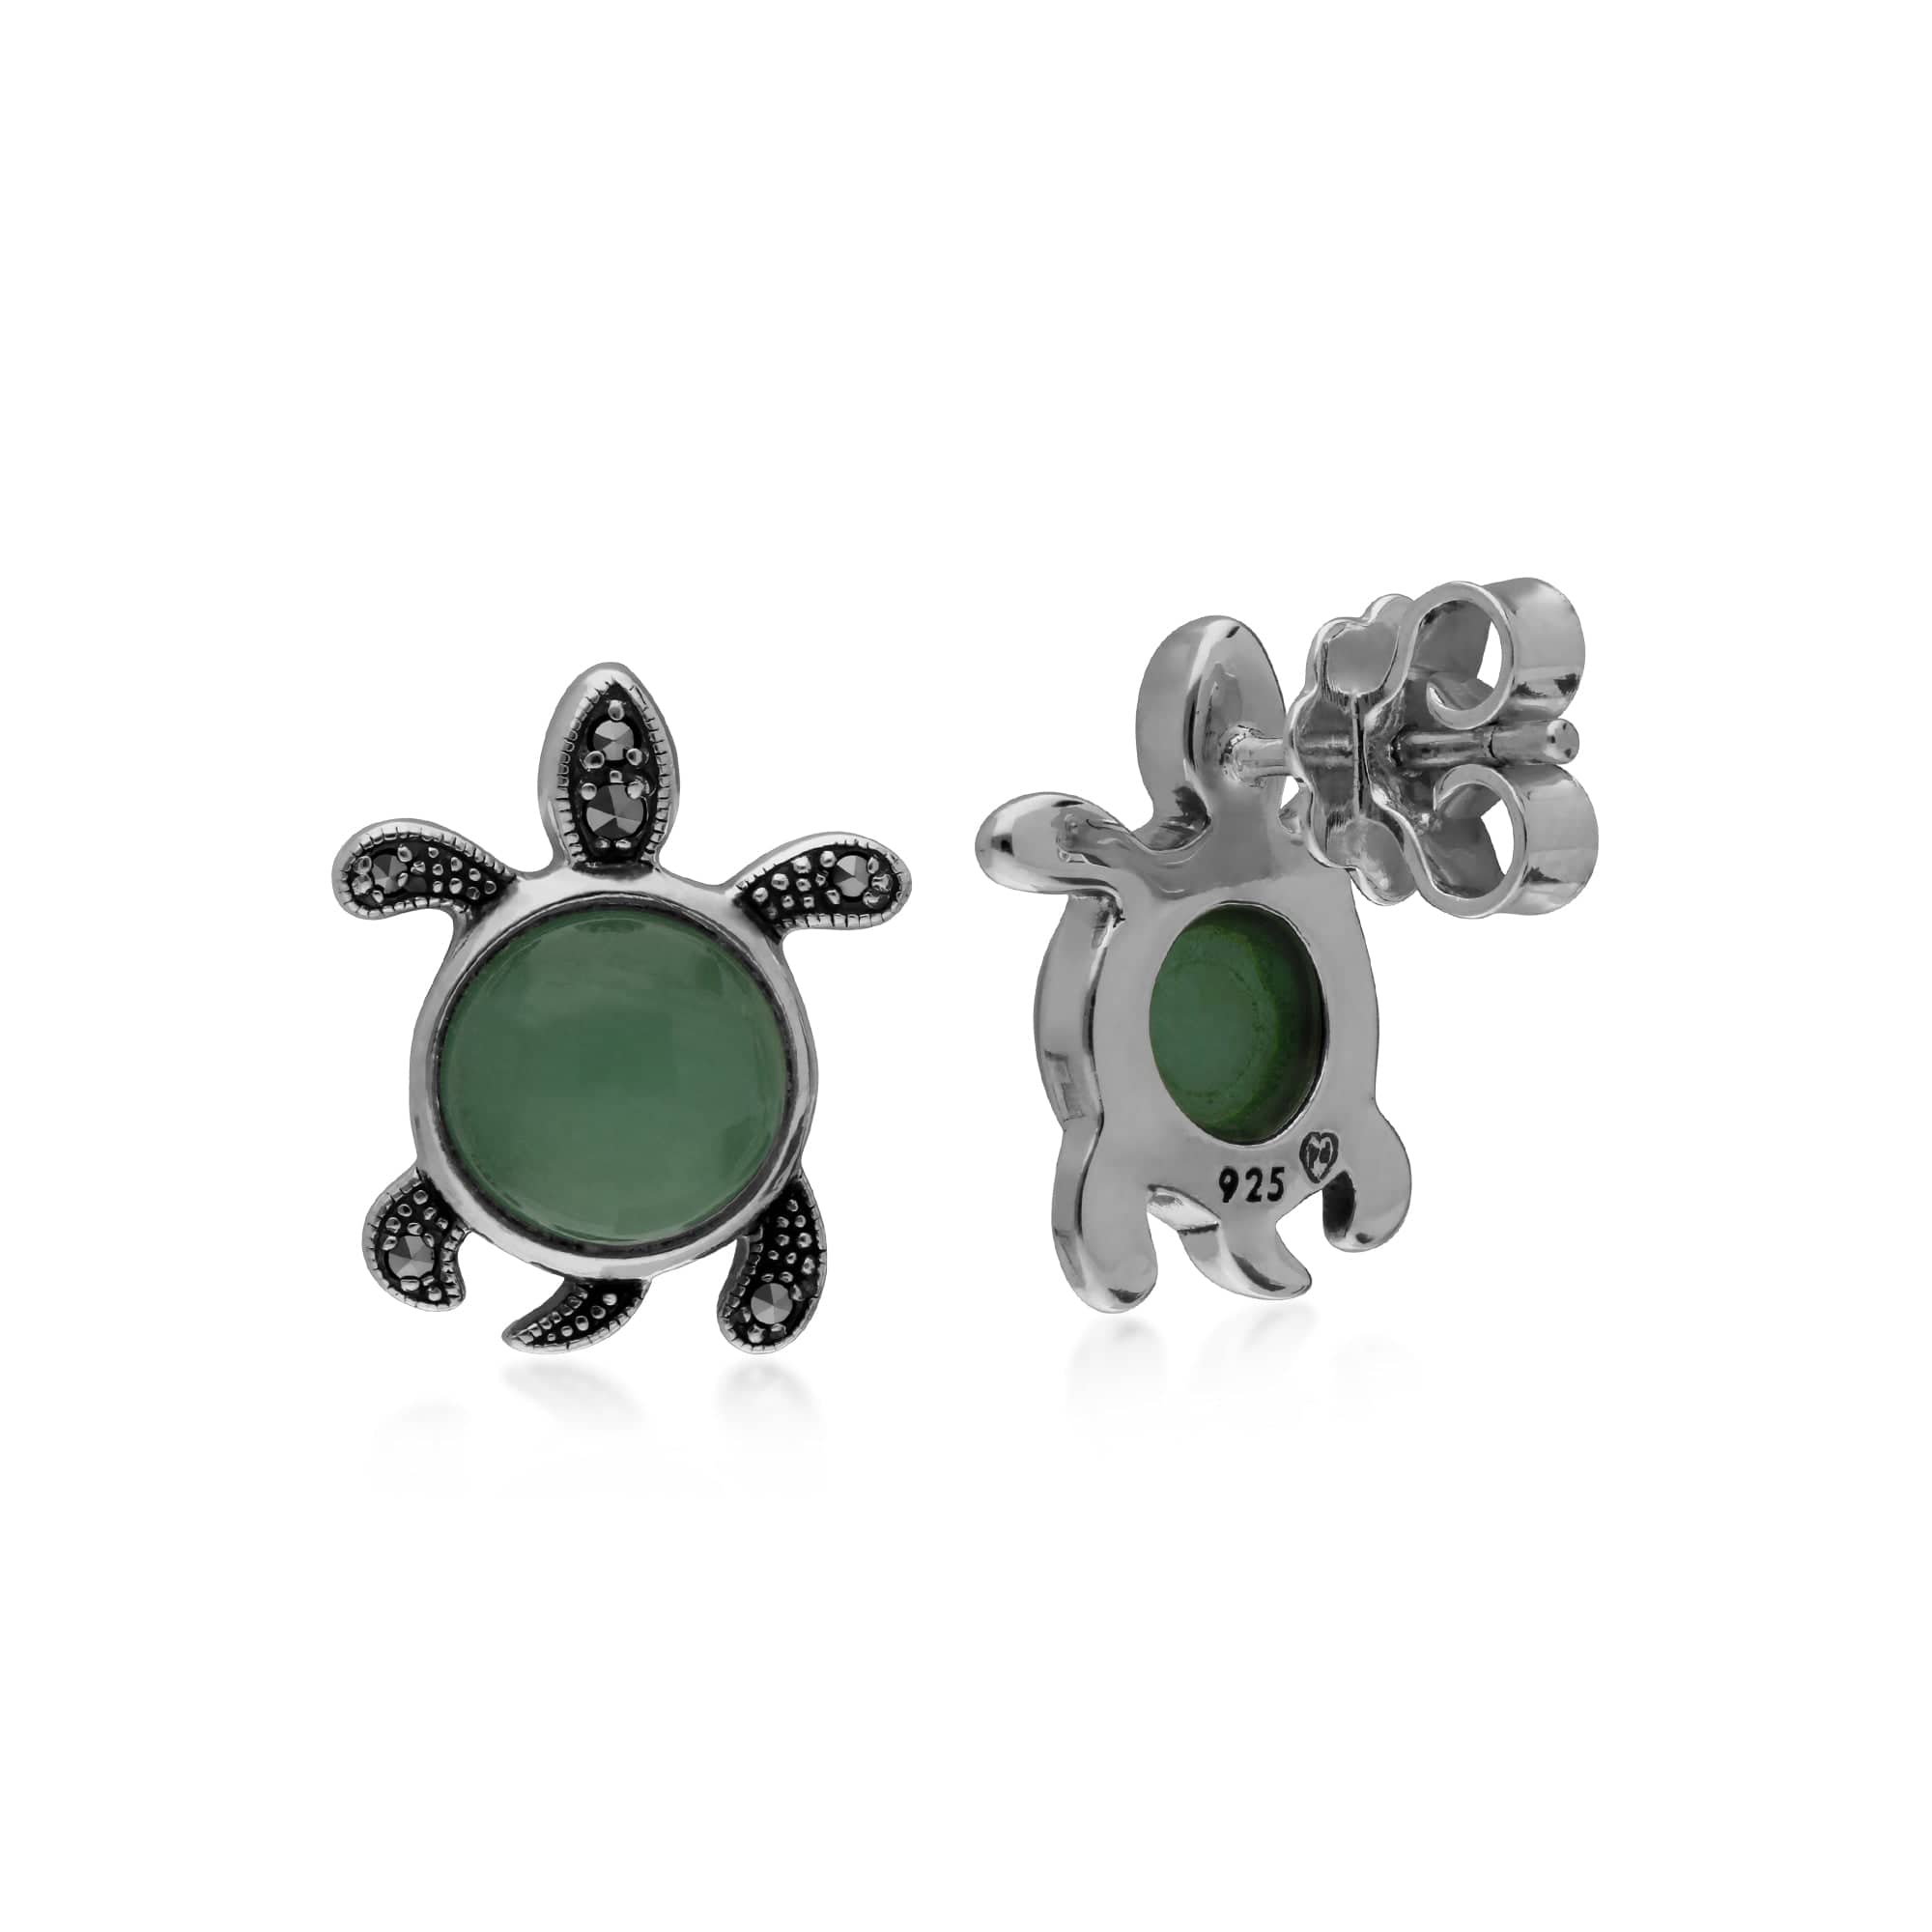 214E863701925 Classic Round Green Jade & Marcasite Turtle Stud Earrings in 925 Sterling Silver 2